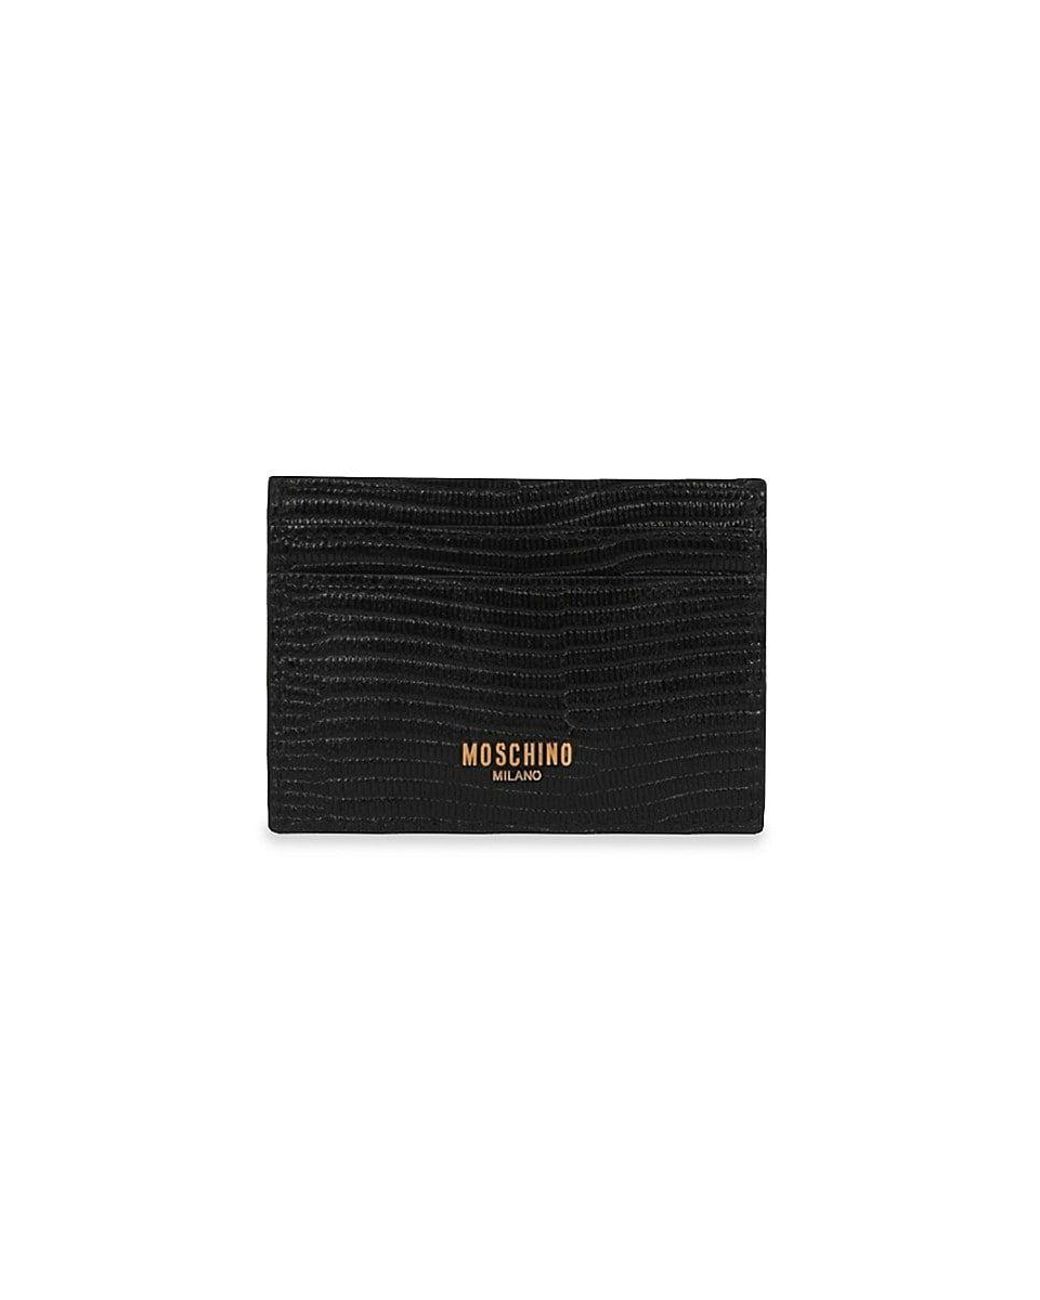 Moschino Logo Leather Card Case in Black | Lyst